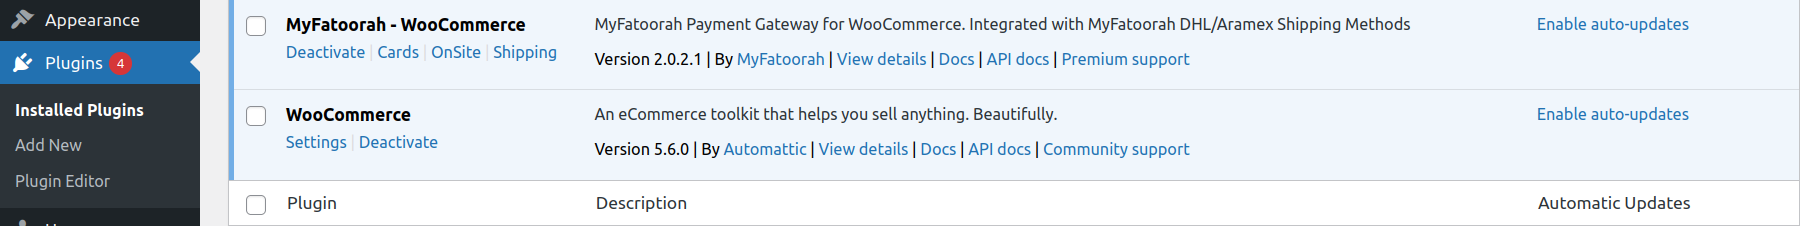 MyFatoorah – WooCommerce after activation